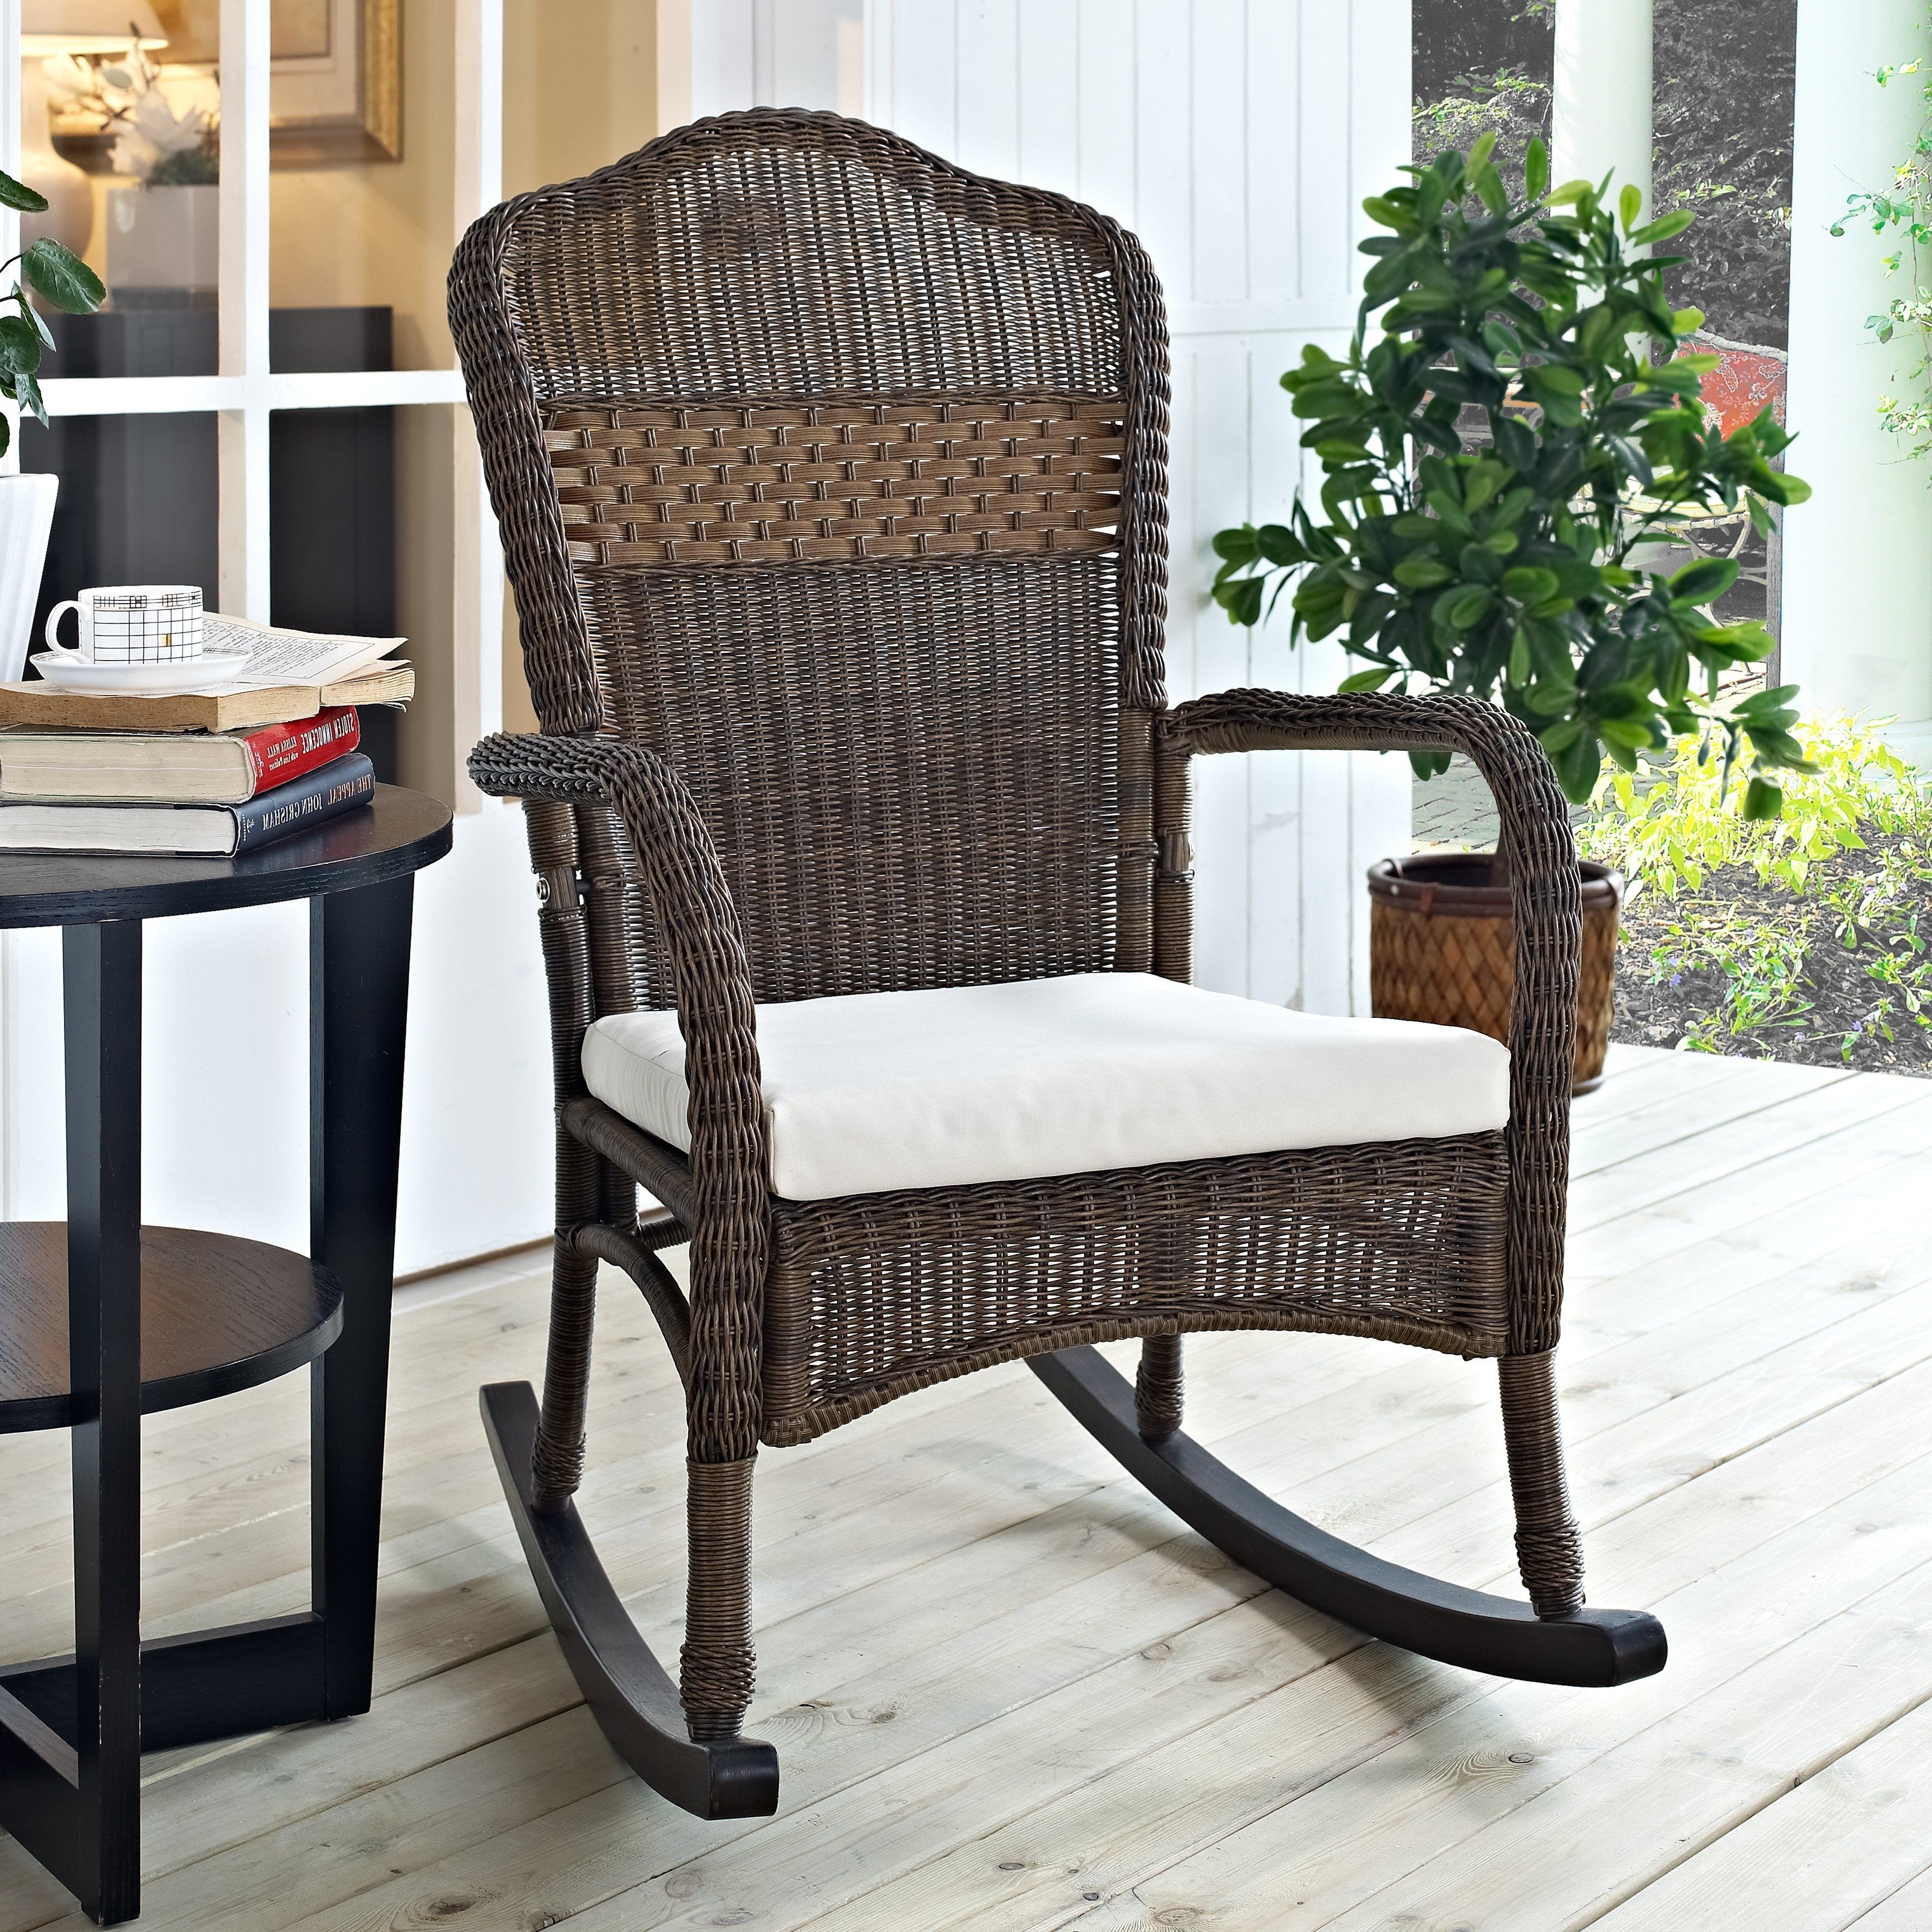 55 White Wicker Rocking Chair, 3 Pc Outdoor Patio Coastal White Intended For Fashionable White Wicker Rocking Chairs (View 13 of 15)